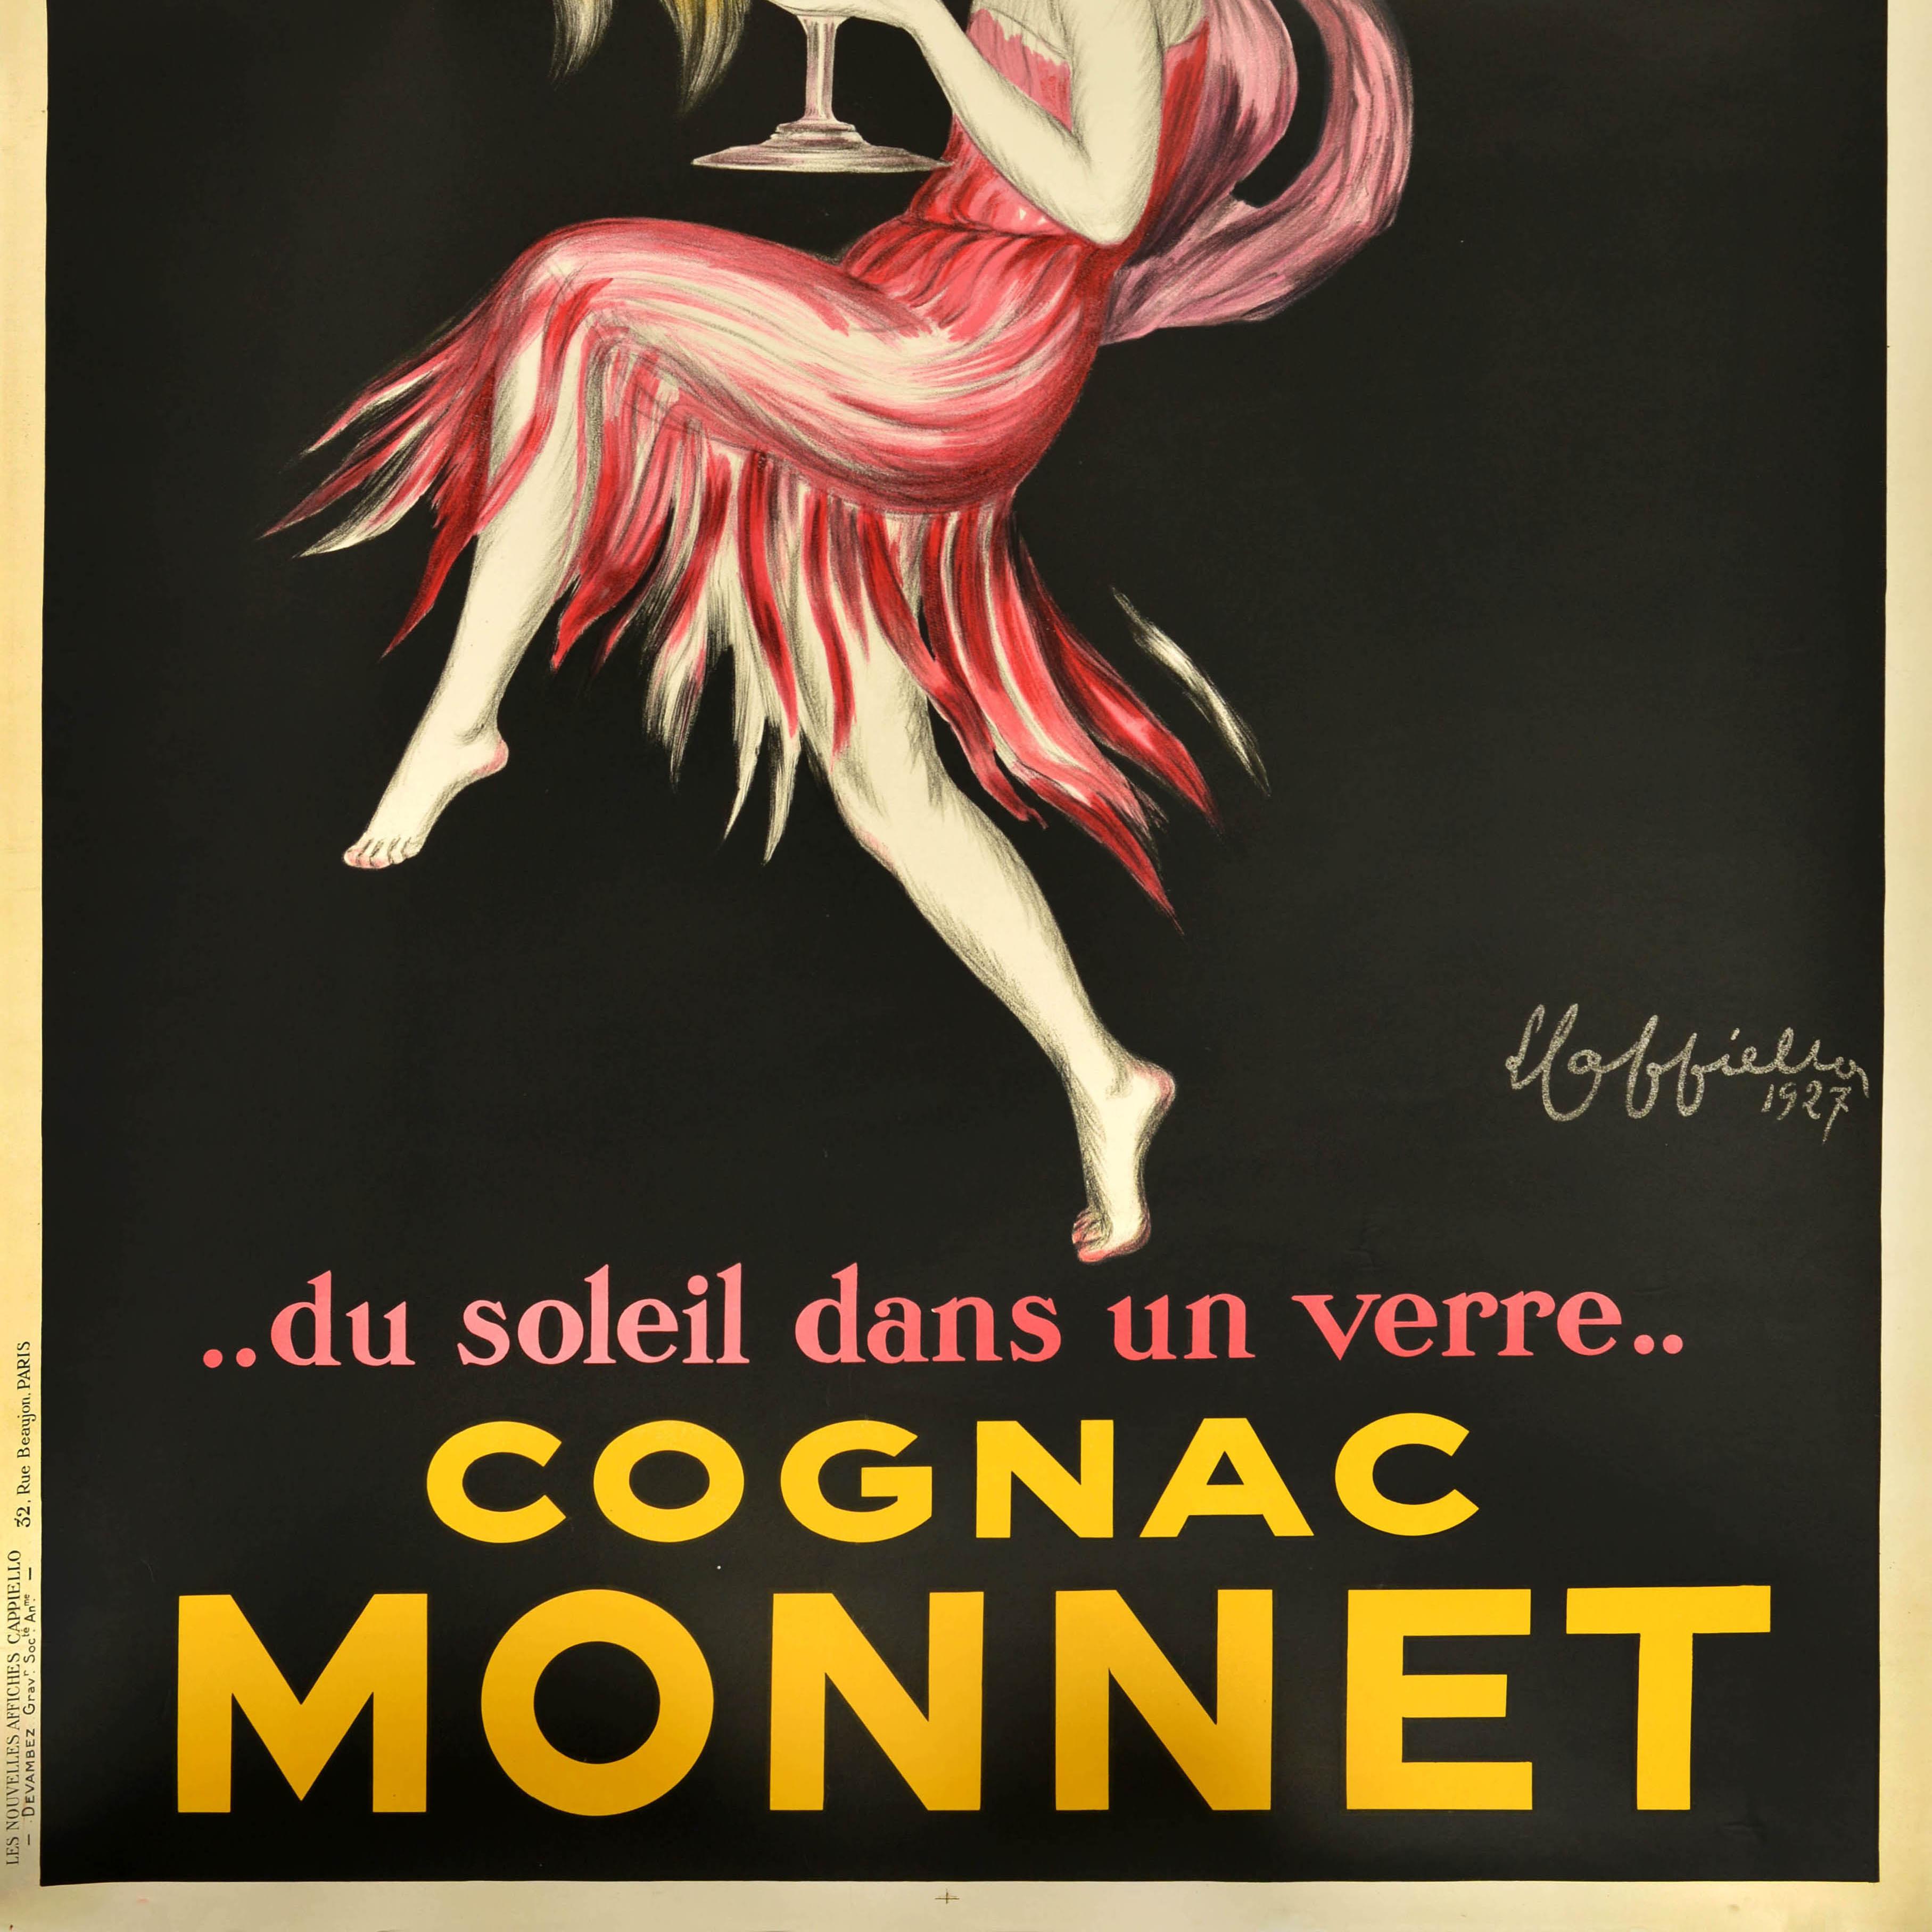 Original Vintage Drink Advertising Poster Cognac Monnet Leonetto Cappiello In Good Condition For Sale In London, GB